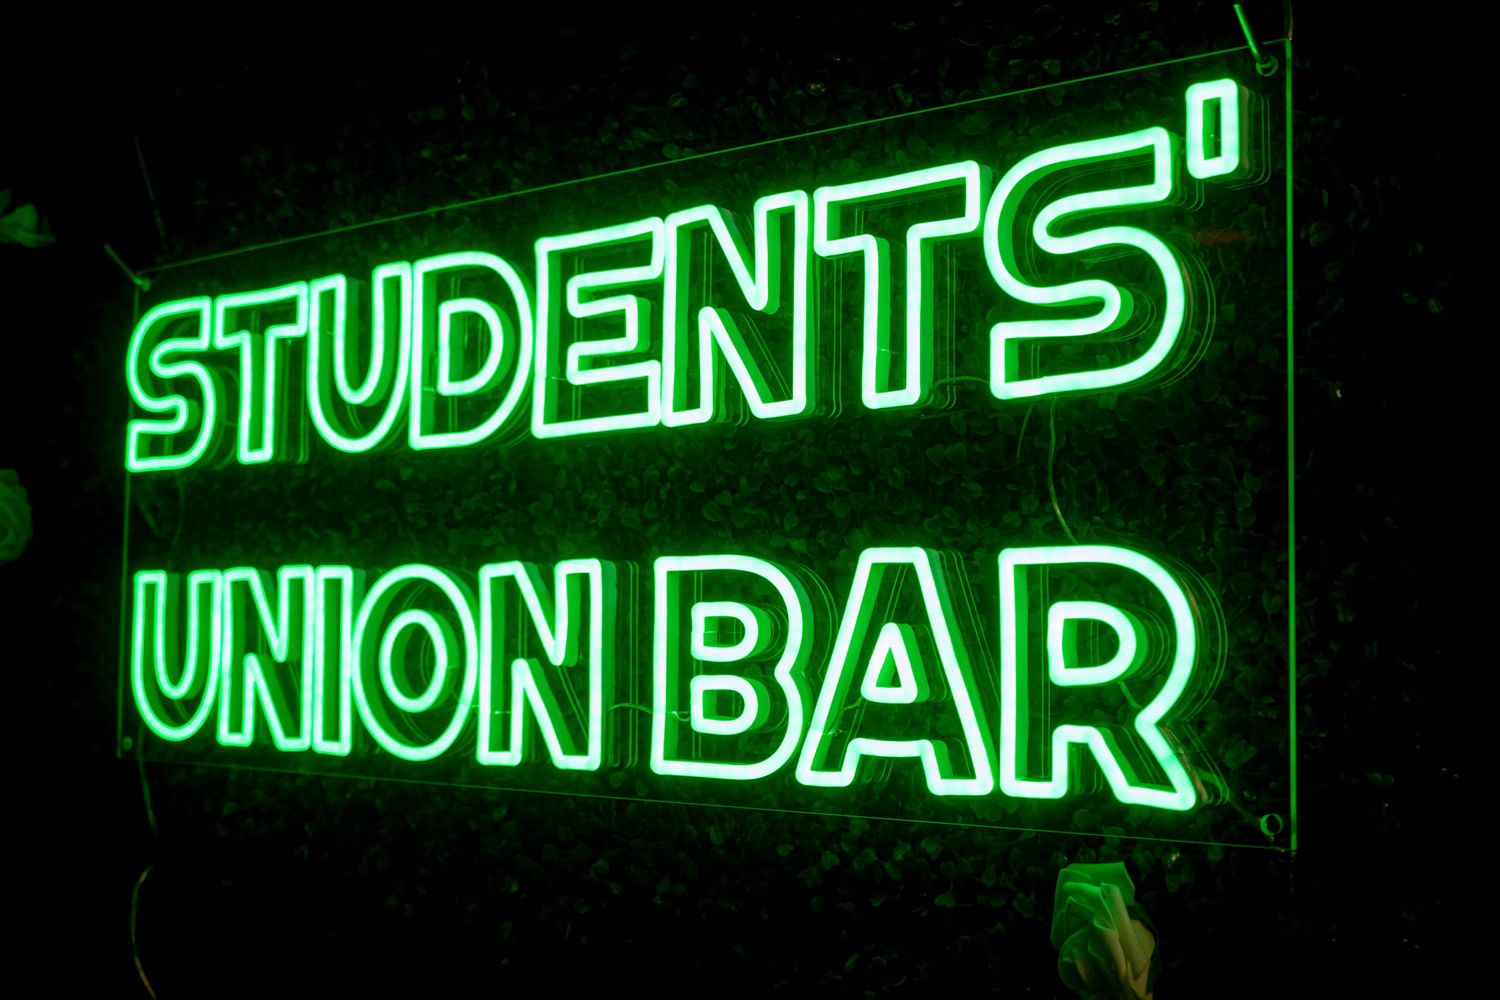 Students' Union Bar Neon Sign